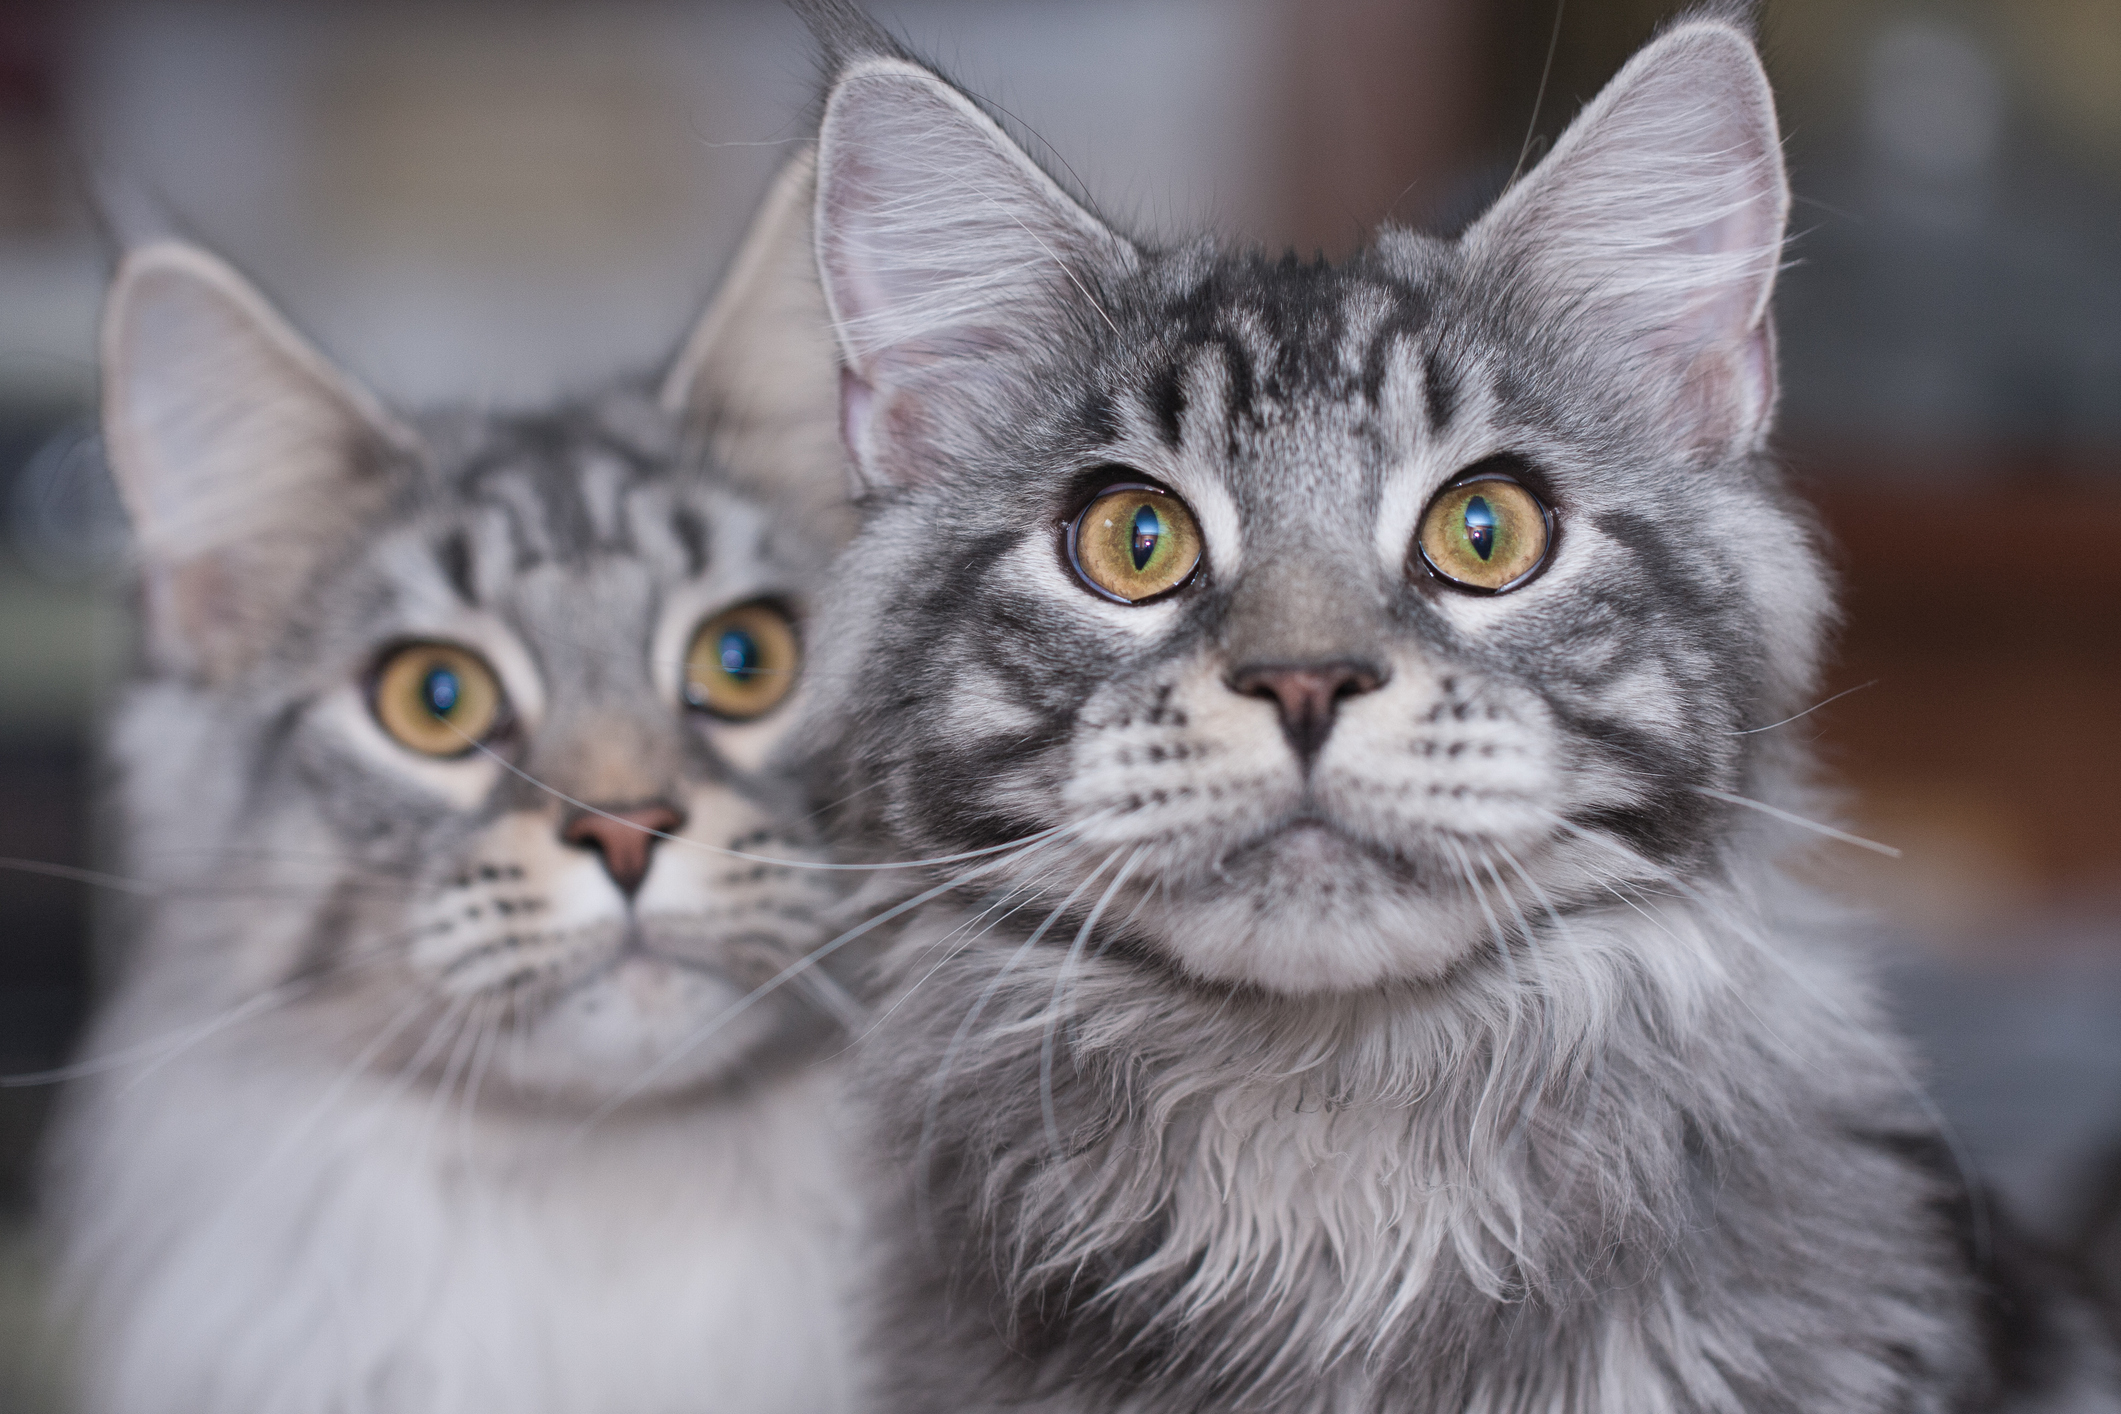 Two gray Maine Coon cats with yellow eyes looking intently at the camera